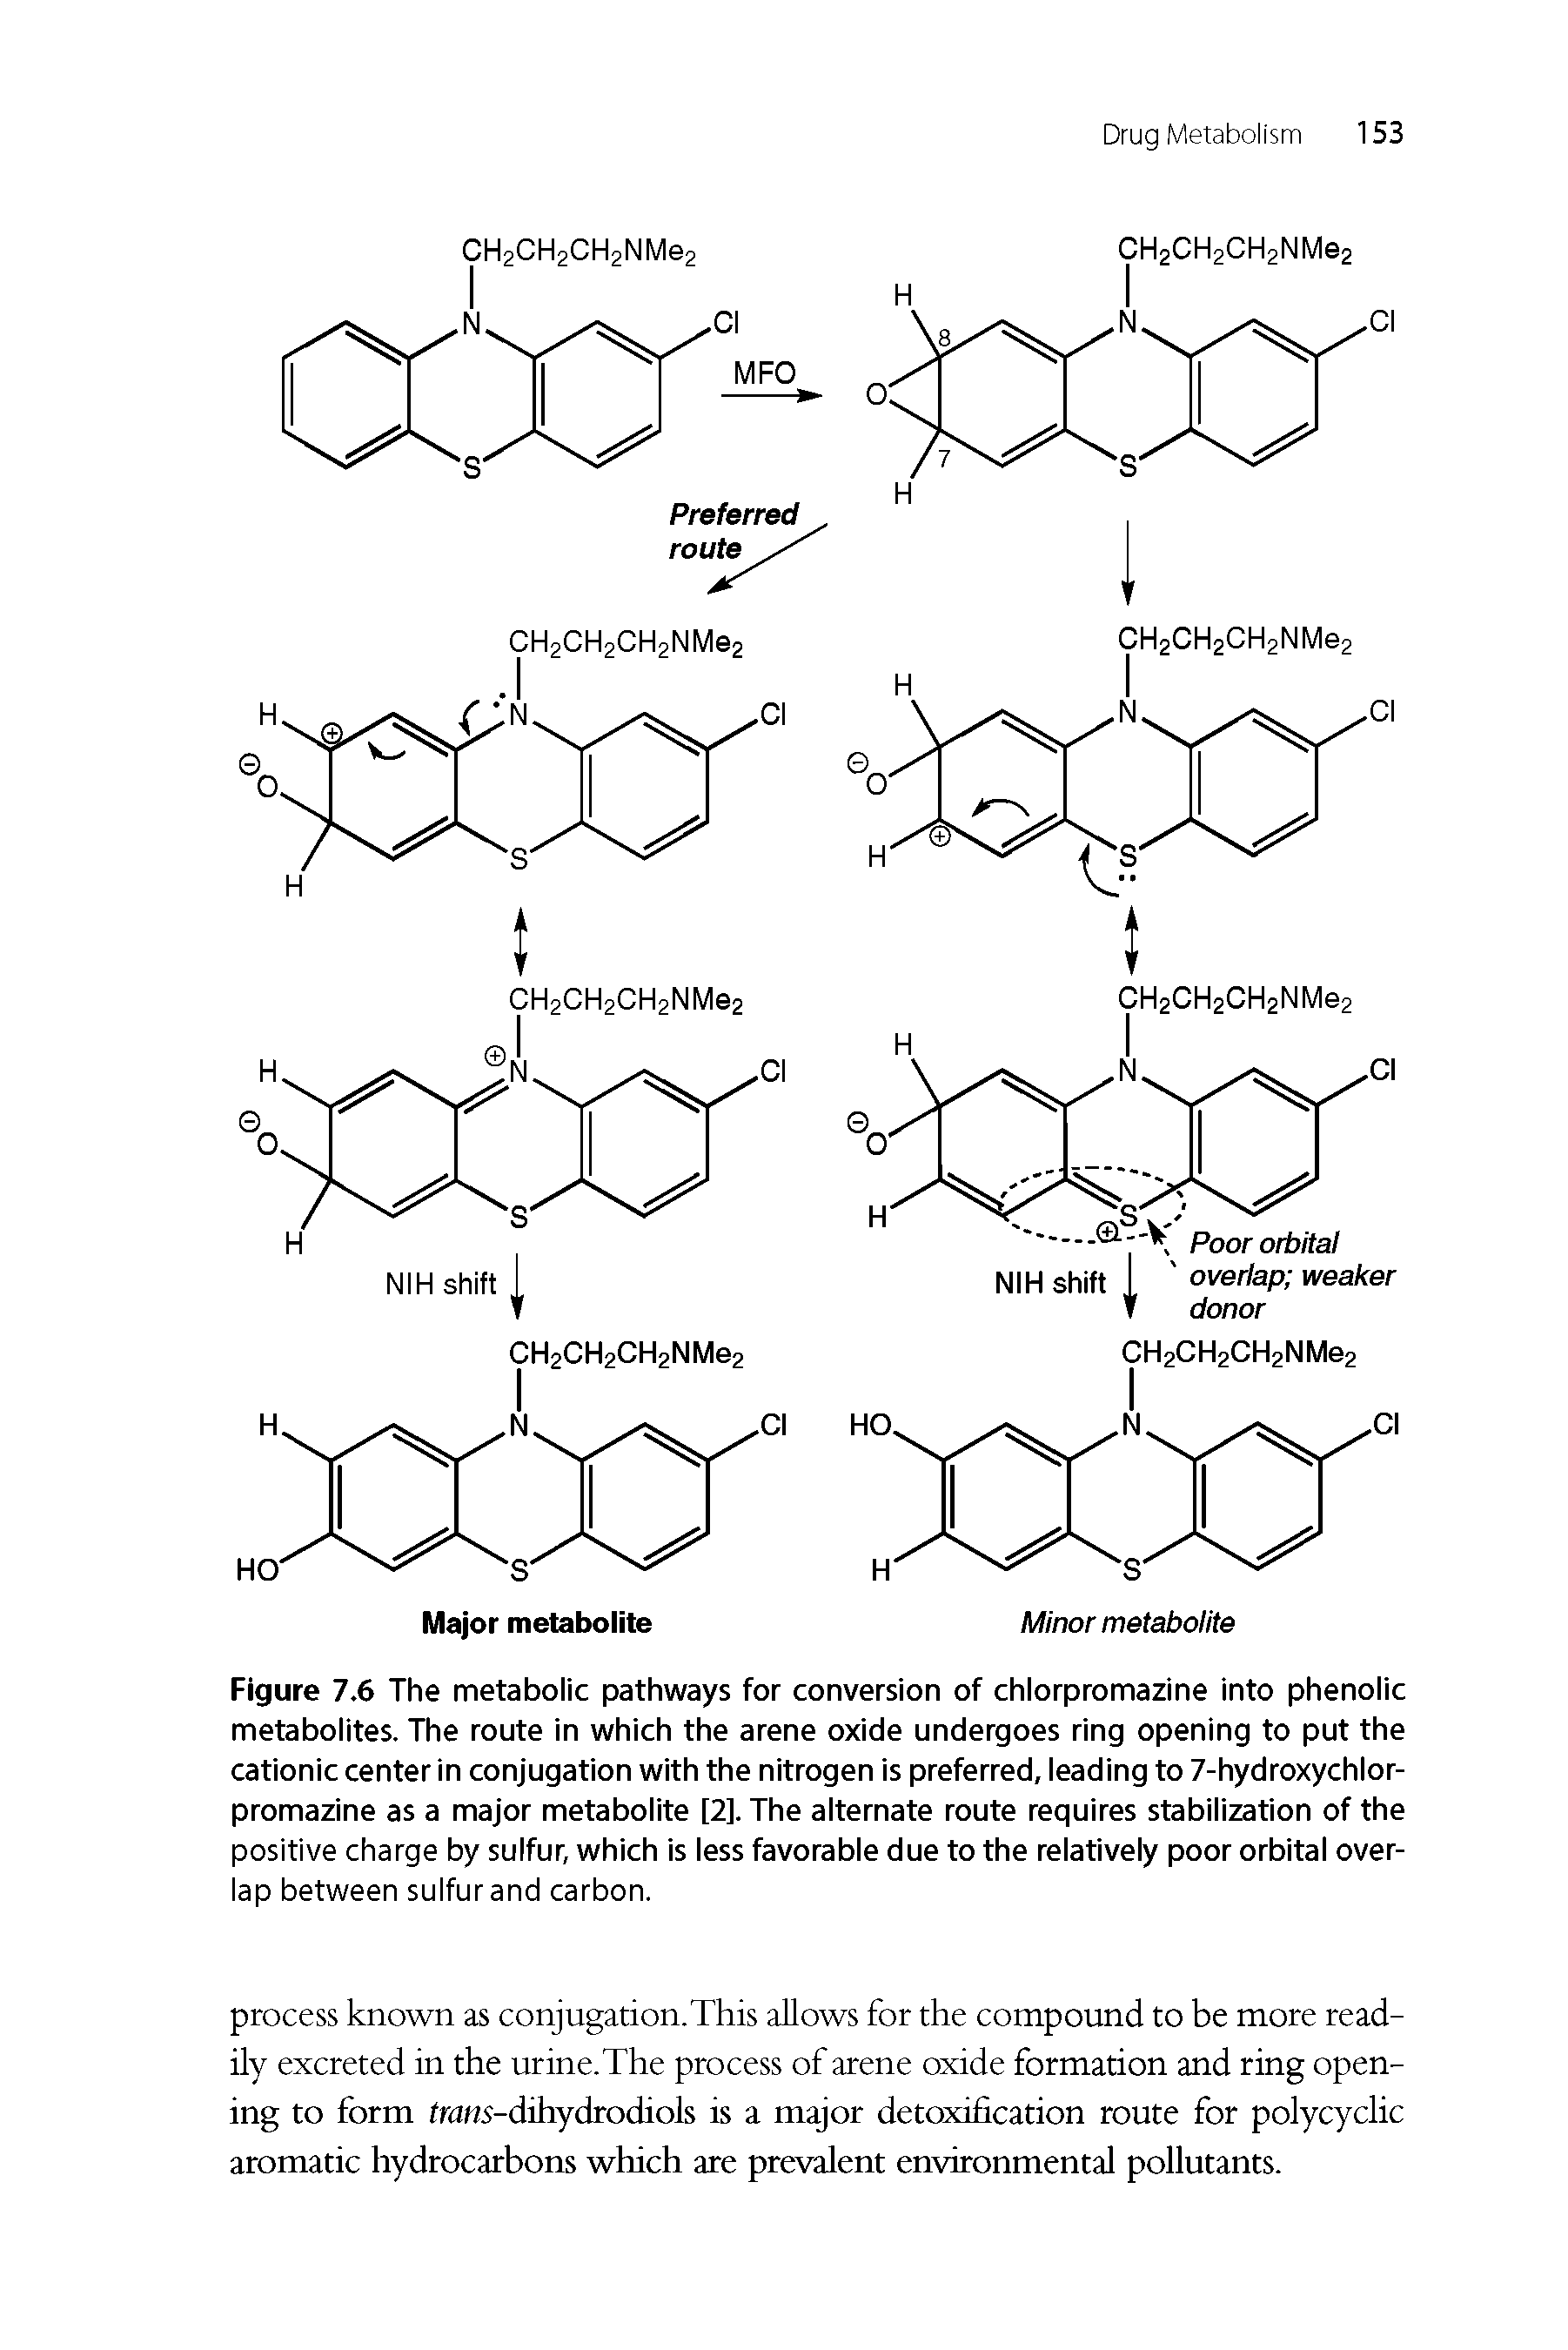 Figure 7.6 The metabolic pathways for conversion of chlorpromazine into phenolic metabolites. The route in which the arene oxide undergoes ring opening to put the cationic center in conjugation with the nitrogen is preferred, leading to 7-hydroxychlor-promazine as a major metabolite [2]. The alternate route requires stabilization of the positive charge by sulfur, which is less favorable due to the relatively poor orbital overlap between sulfur and carbon.